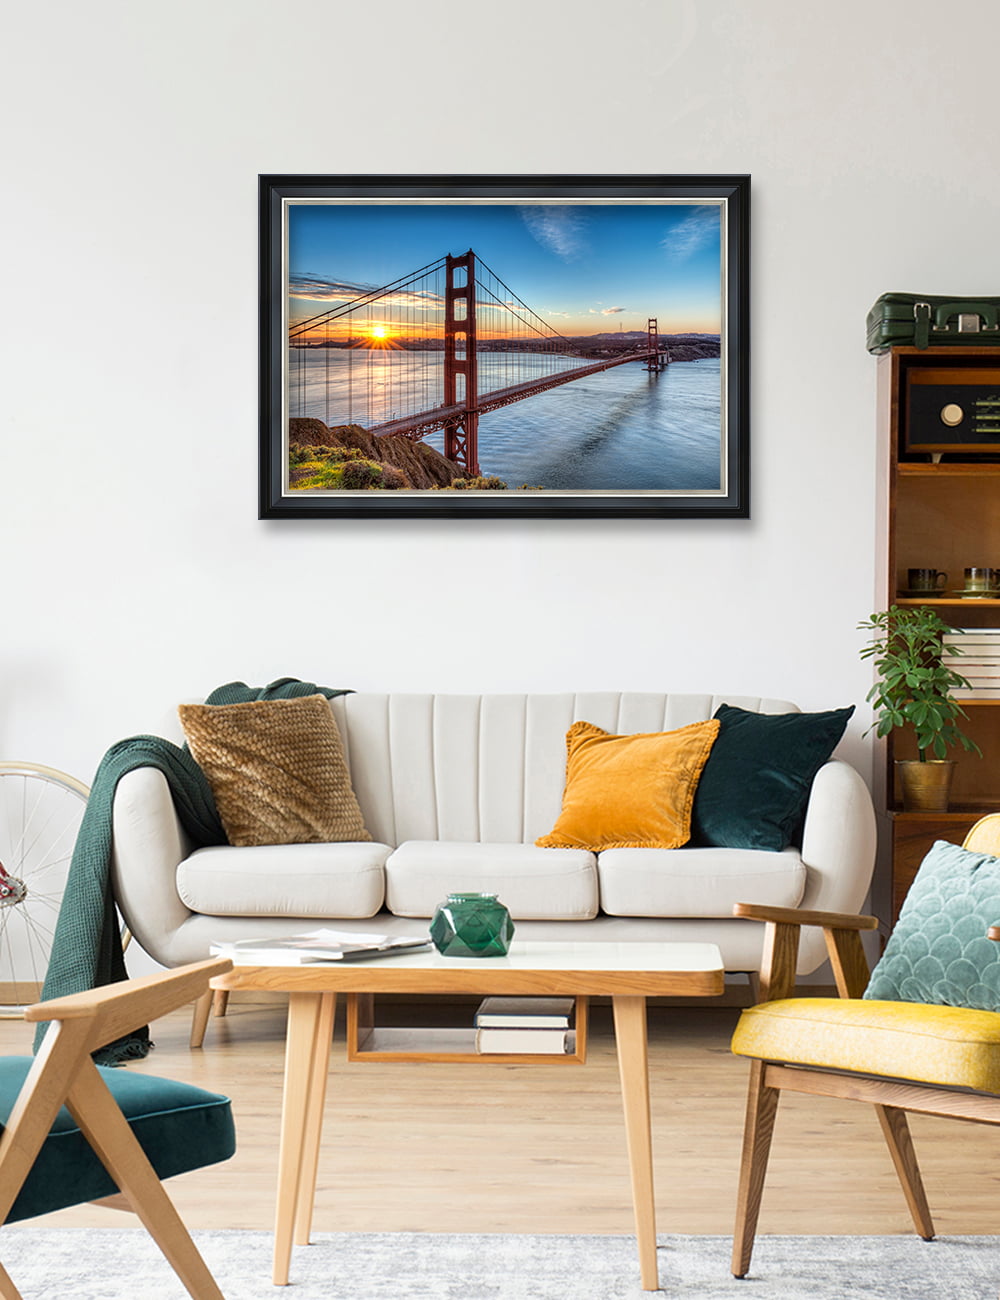 DecorArts Golden Gate Bridge San Francisco Califonia, Giclee Print on  Photo Paper with Matching Classical Brown Frame. Total Size w/Frame:  33.25x23.25